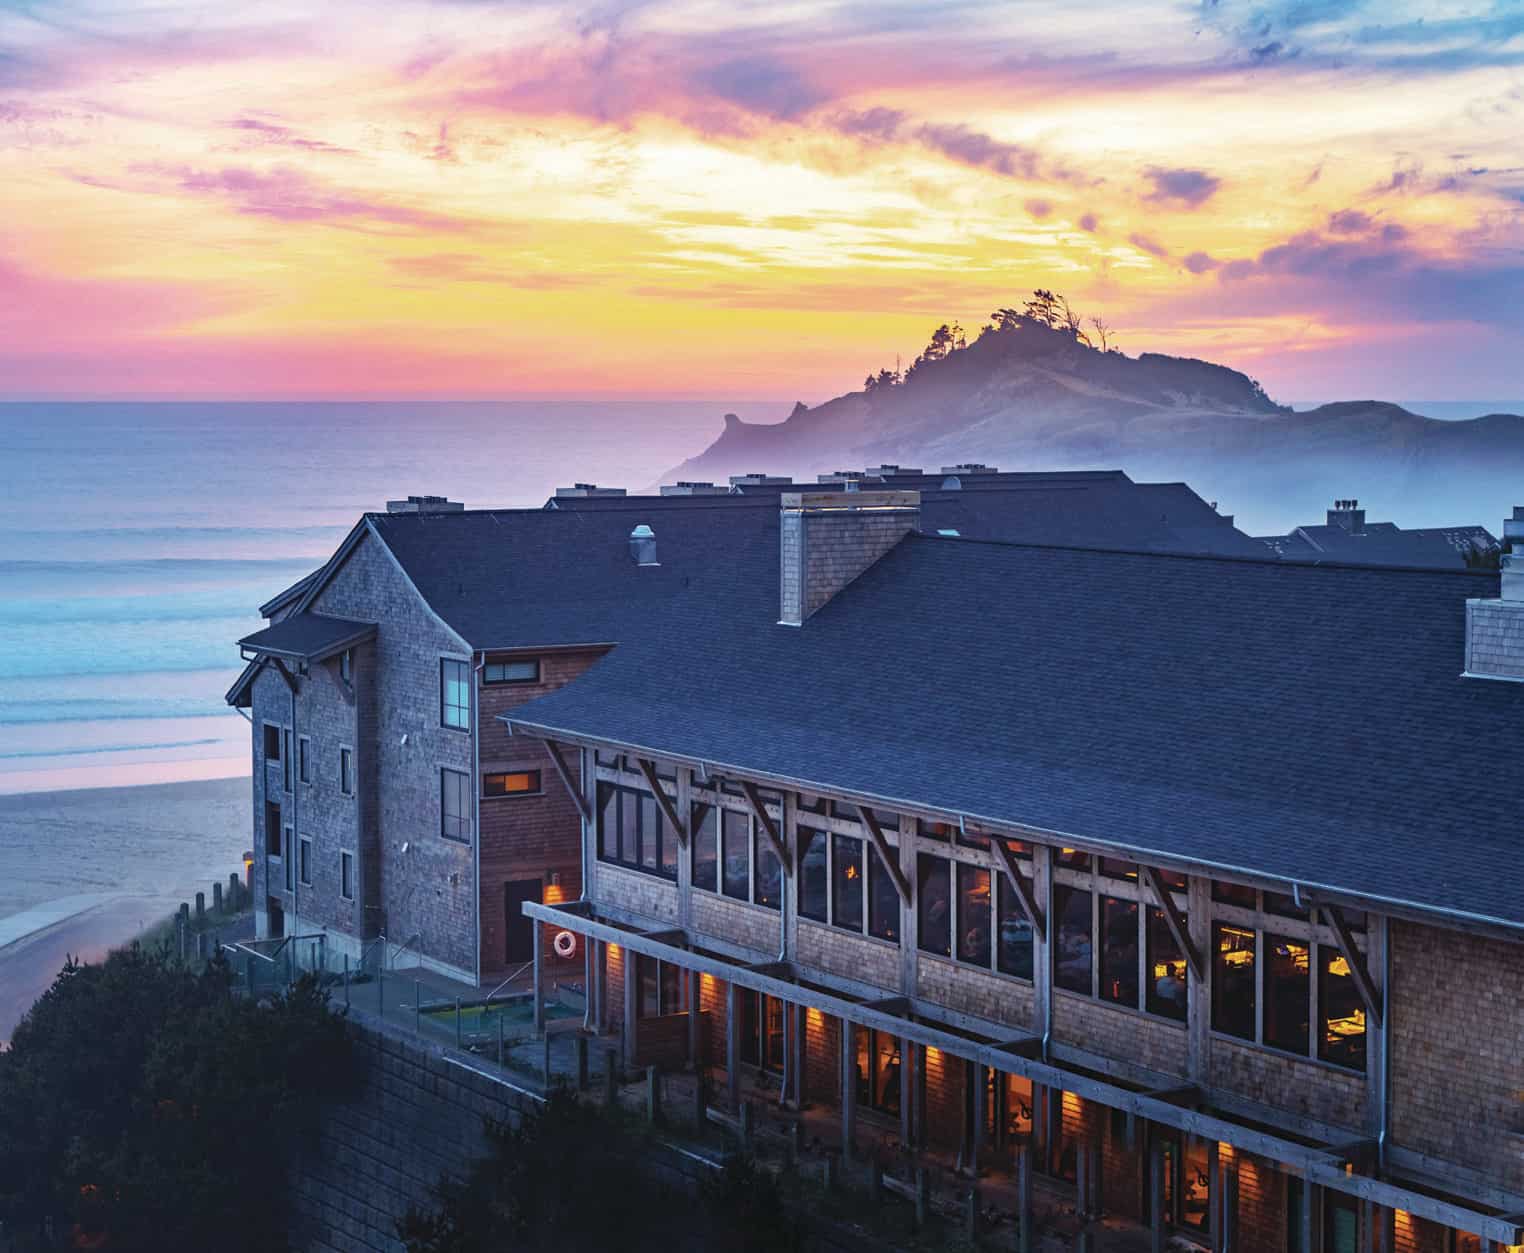 Adventures in Pacific City are greatly supported by a retreat to Headlands Coastal Lodge.